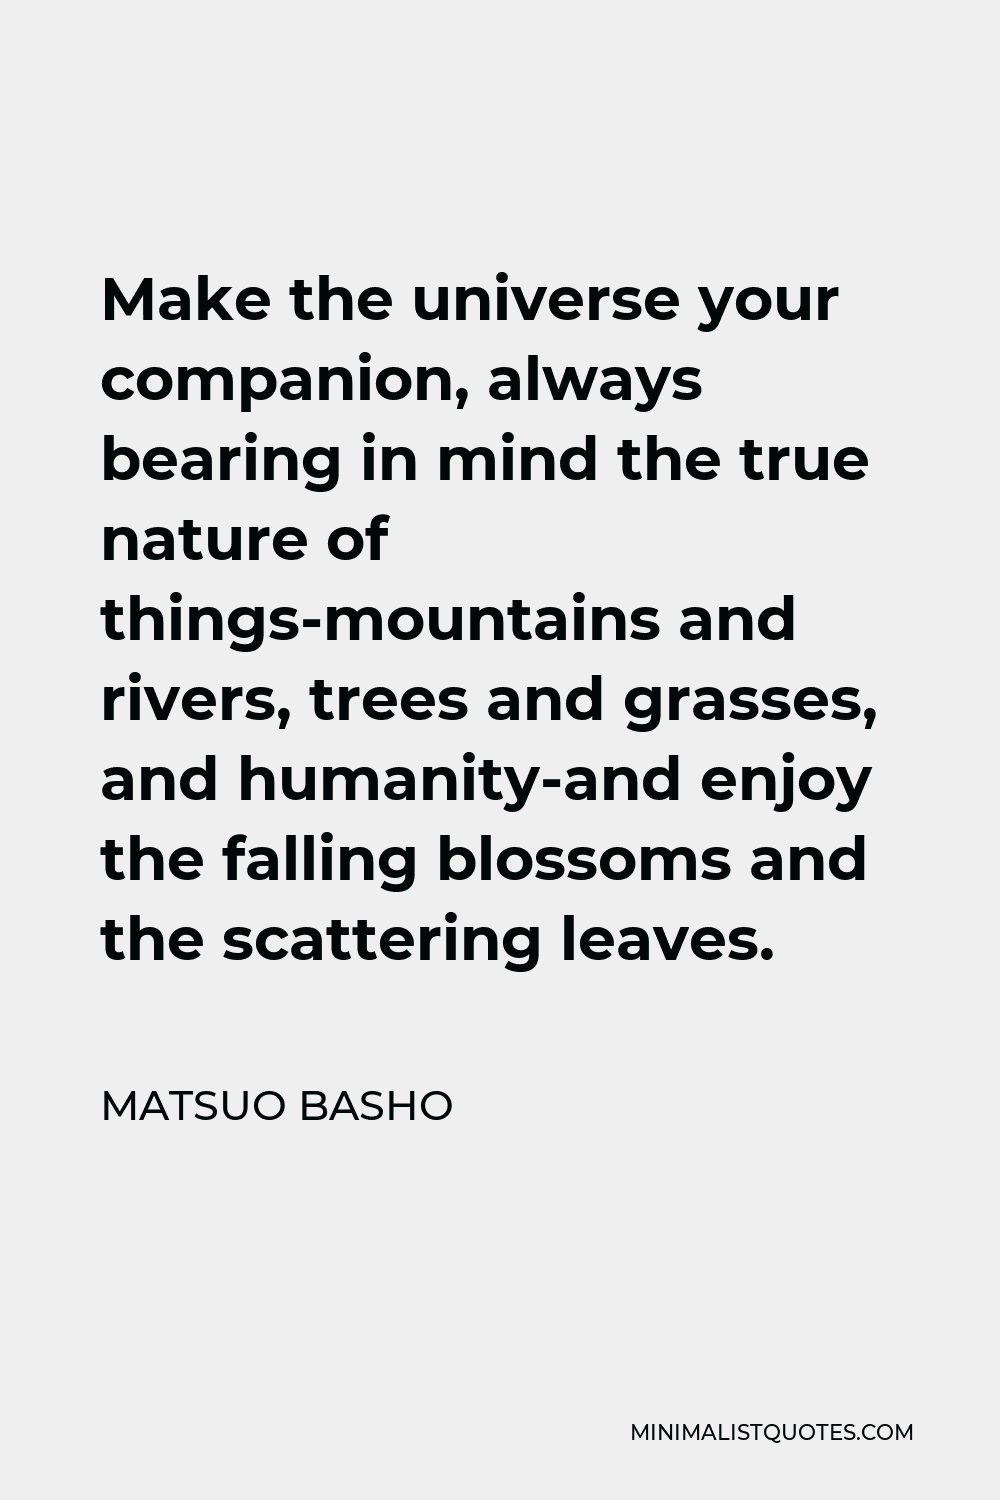 Matsuo Basho Quote - Make the universe your companion, always bearing in mind the true nature of things-mountains and rivers, trees and grasses, and humanity-and enjoy the falling blossoms and the scattering leaves.